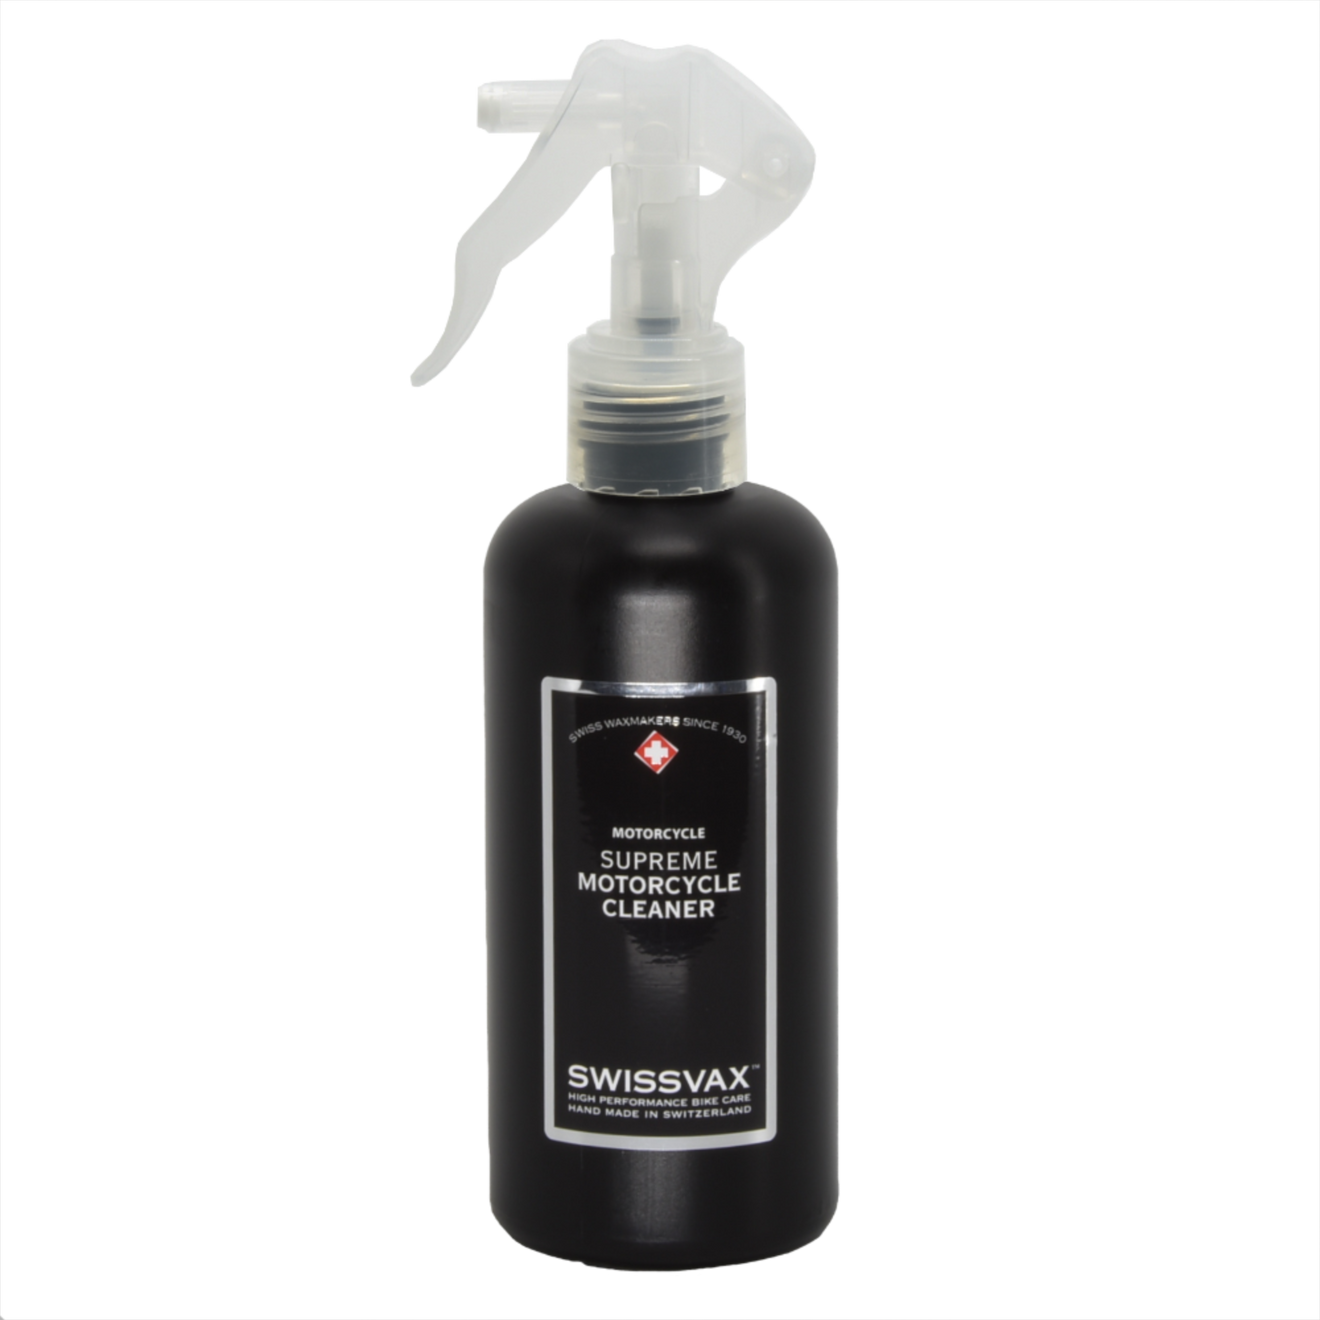 Swissvax Supreme Motorcycle Cleaner